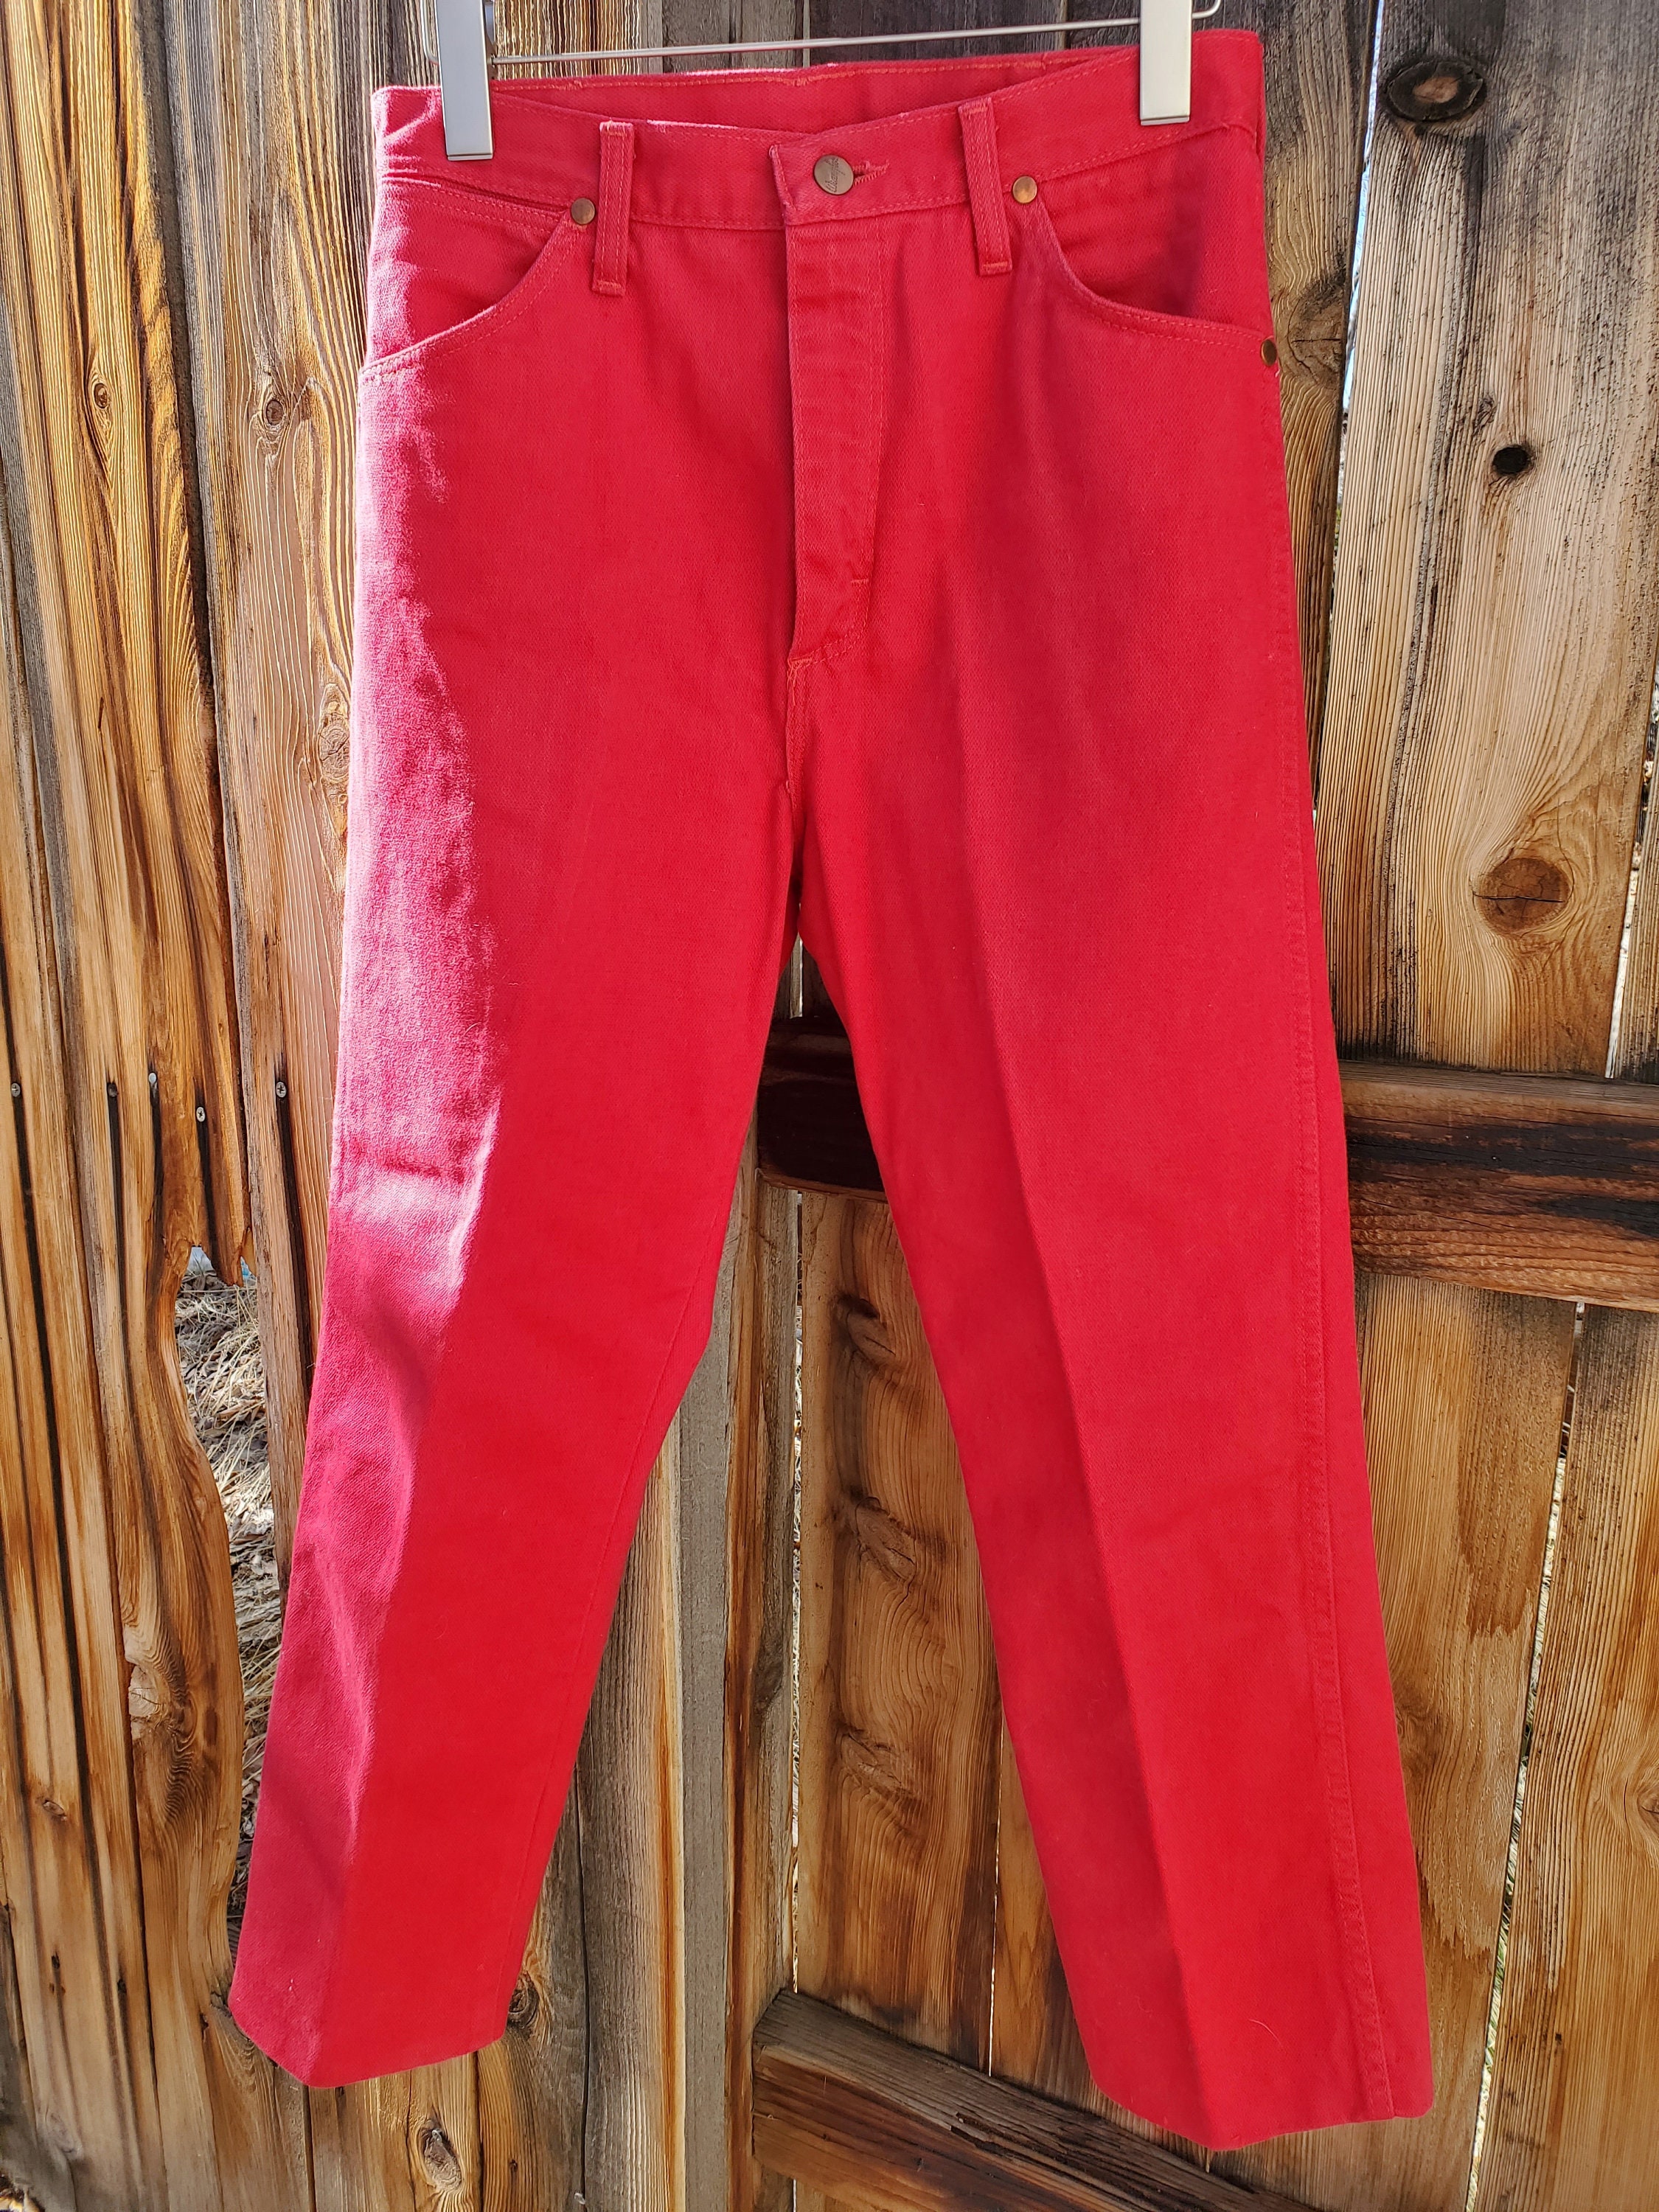 Vintage faded cherry red Wrangler jeans / 1980s Bright Red | Etsy